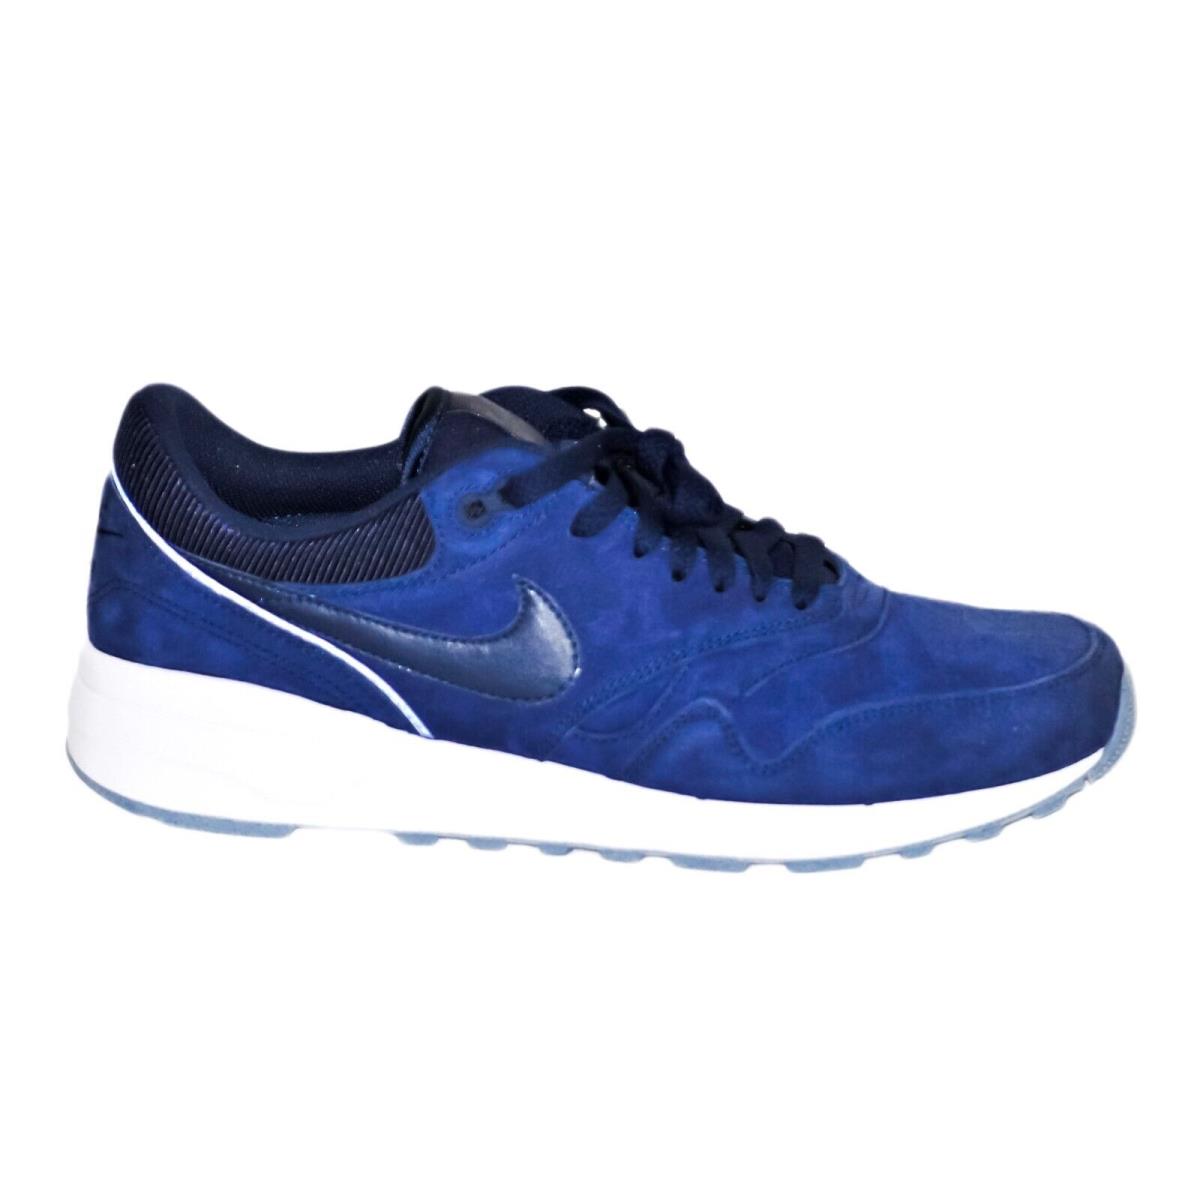 Nike shoes Air Odyssey - Obsidian White, Blue, Gray 0